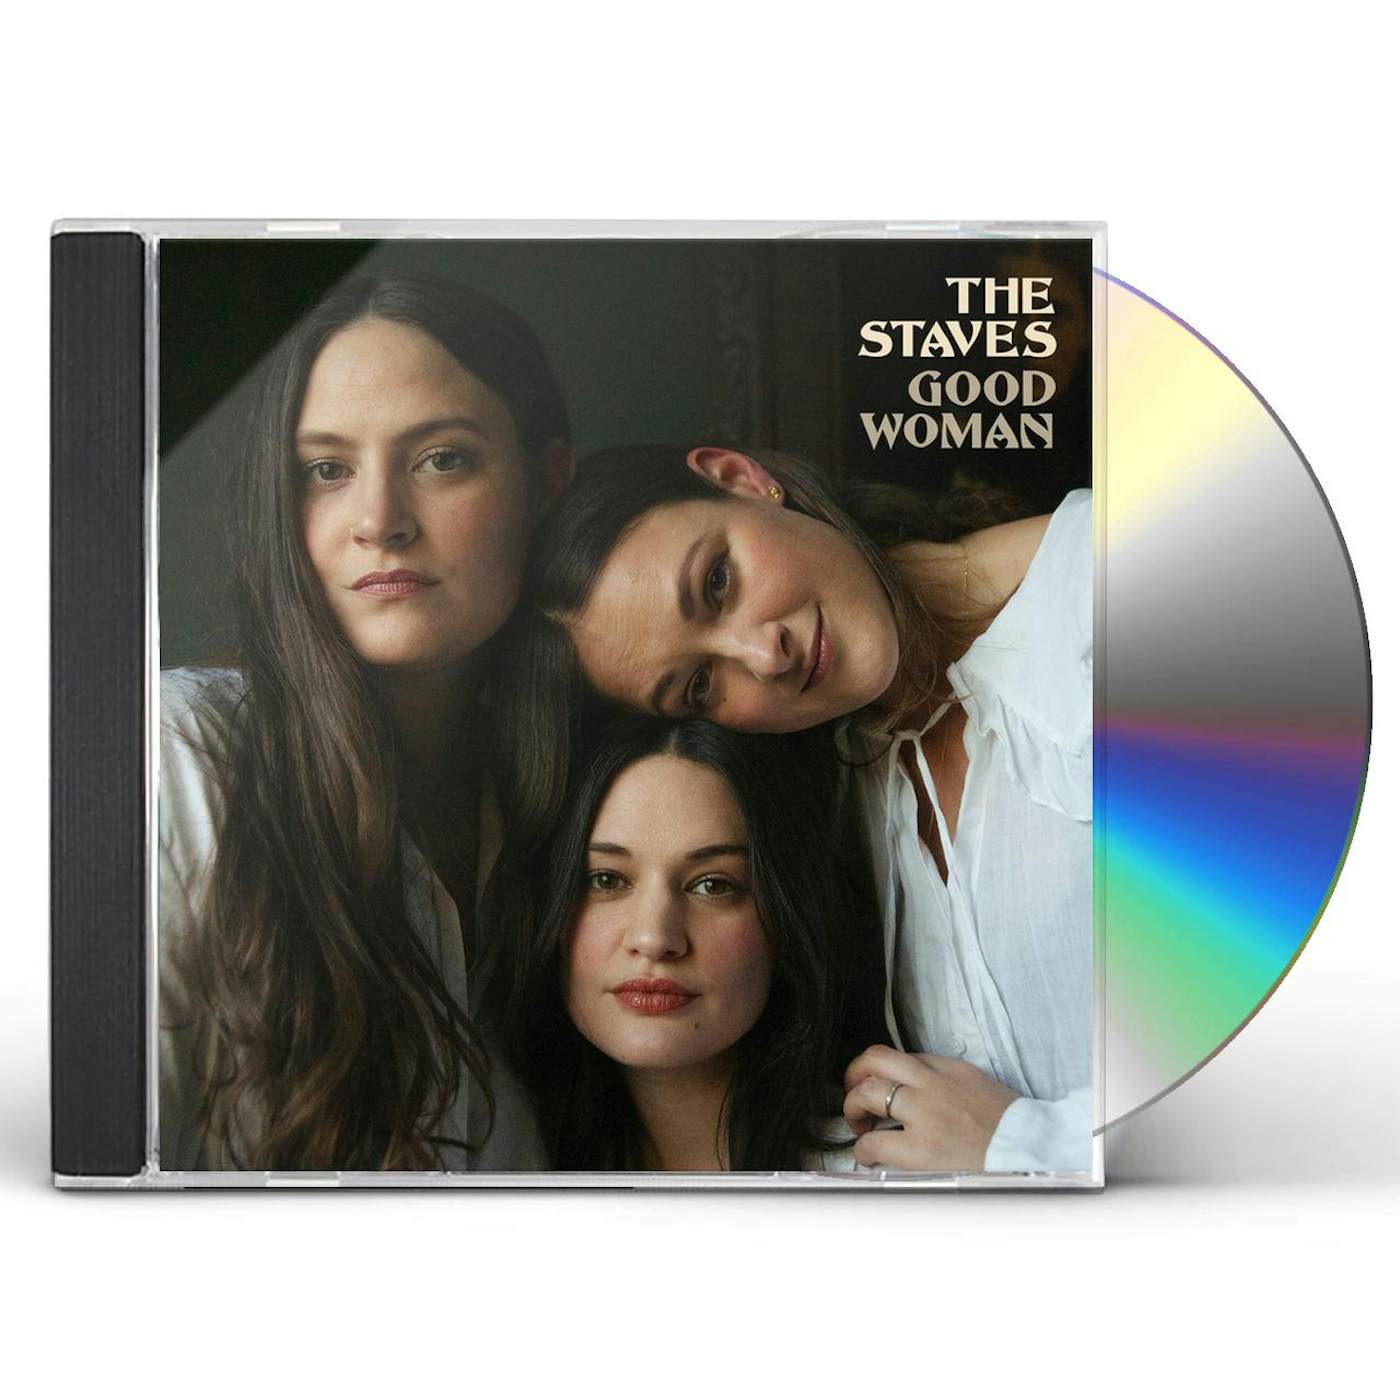 The Staves GOOD WOMAN CD